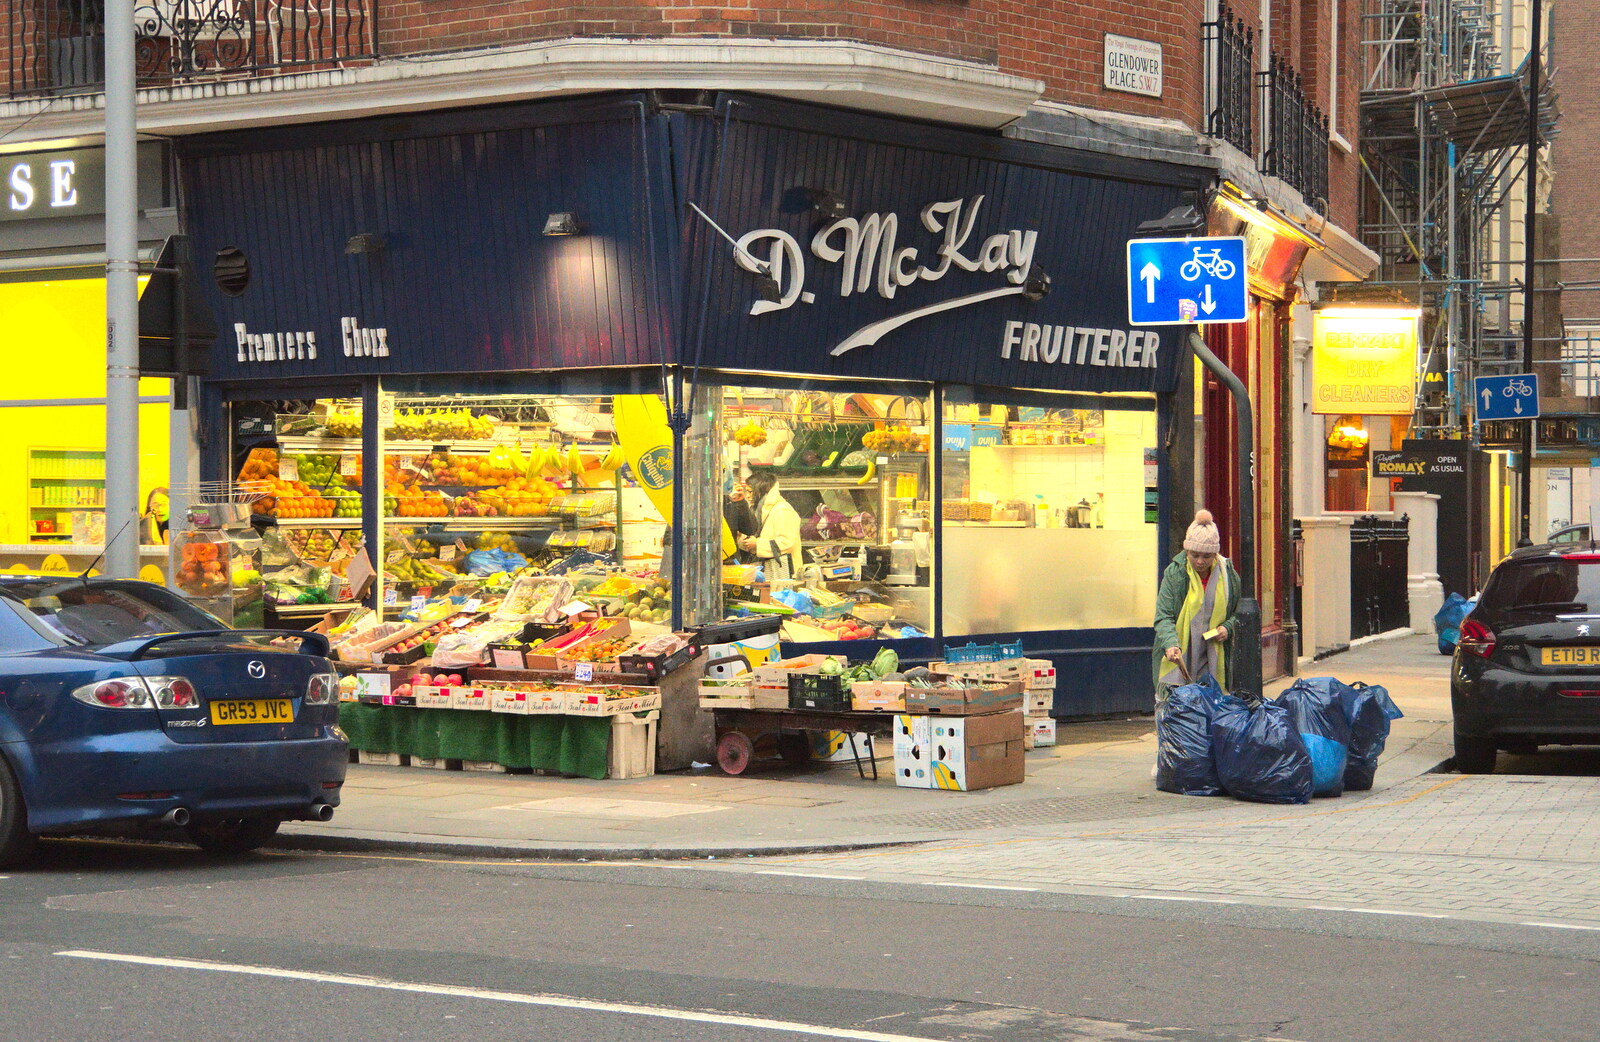 An illuminated greengrocers from A Trip to the Natural History Museum, Kensington, London - 15th January 2022